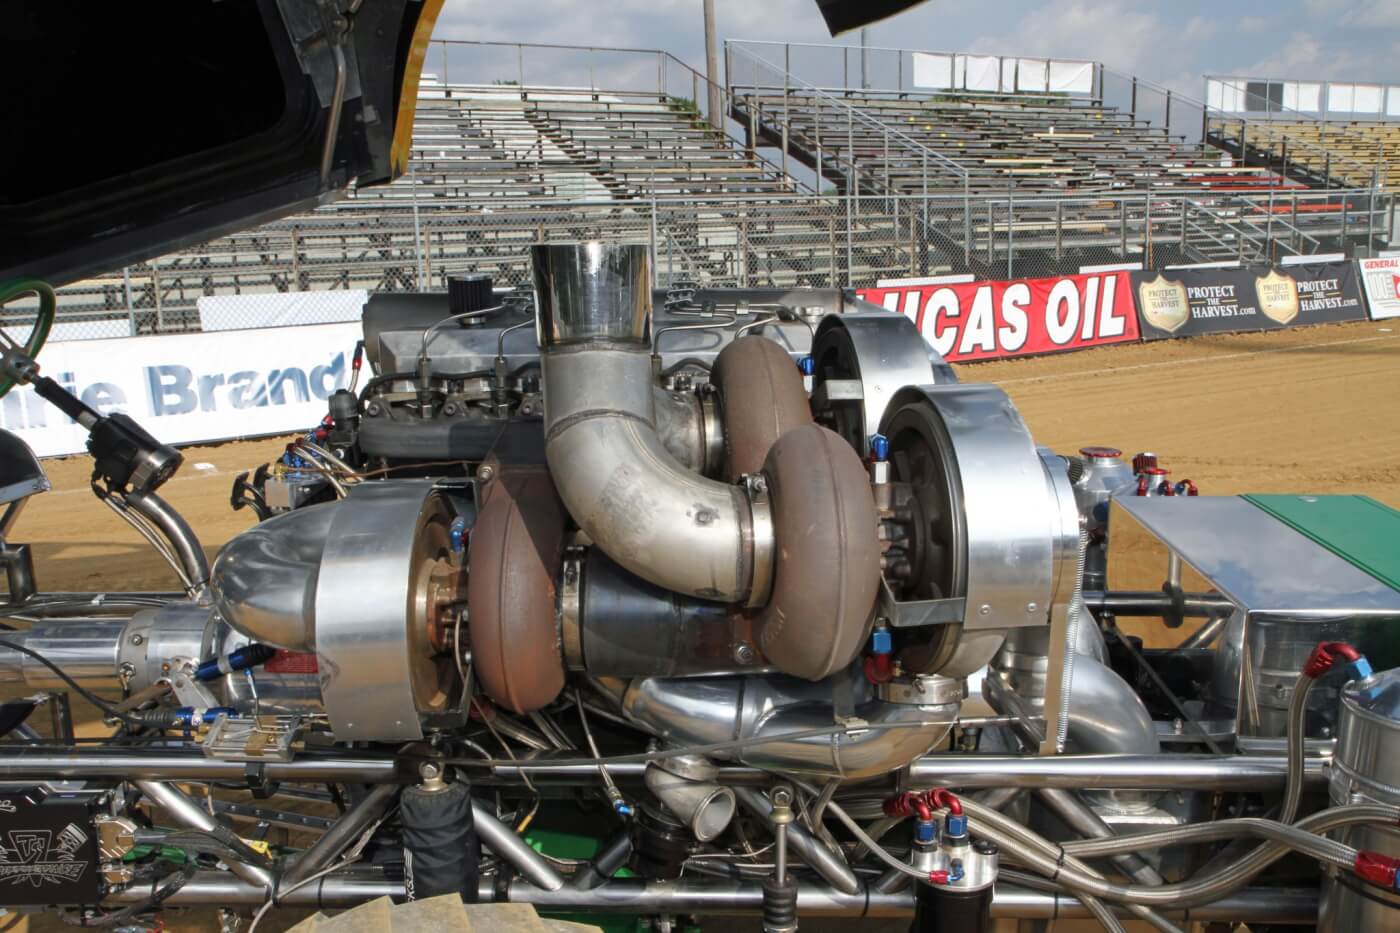 Then you see it from the side and realize that there are three of the big Columbus Diesel turbos and you know this monster makes some serious power.